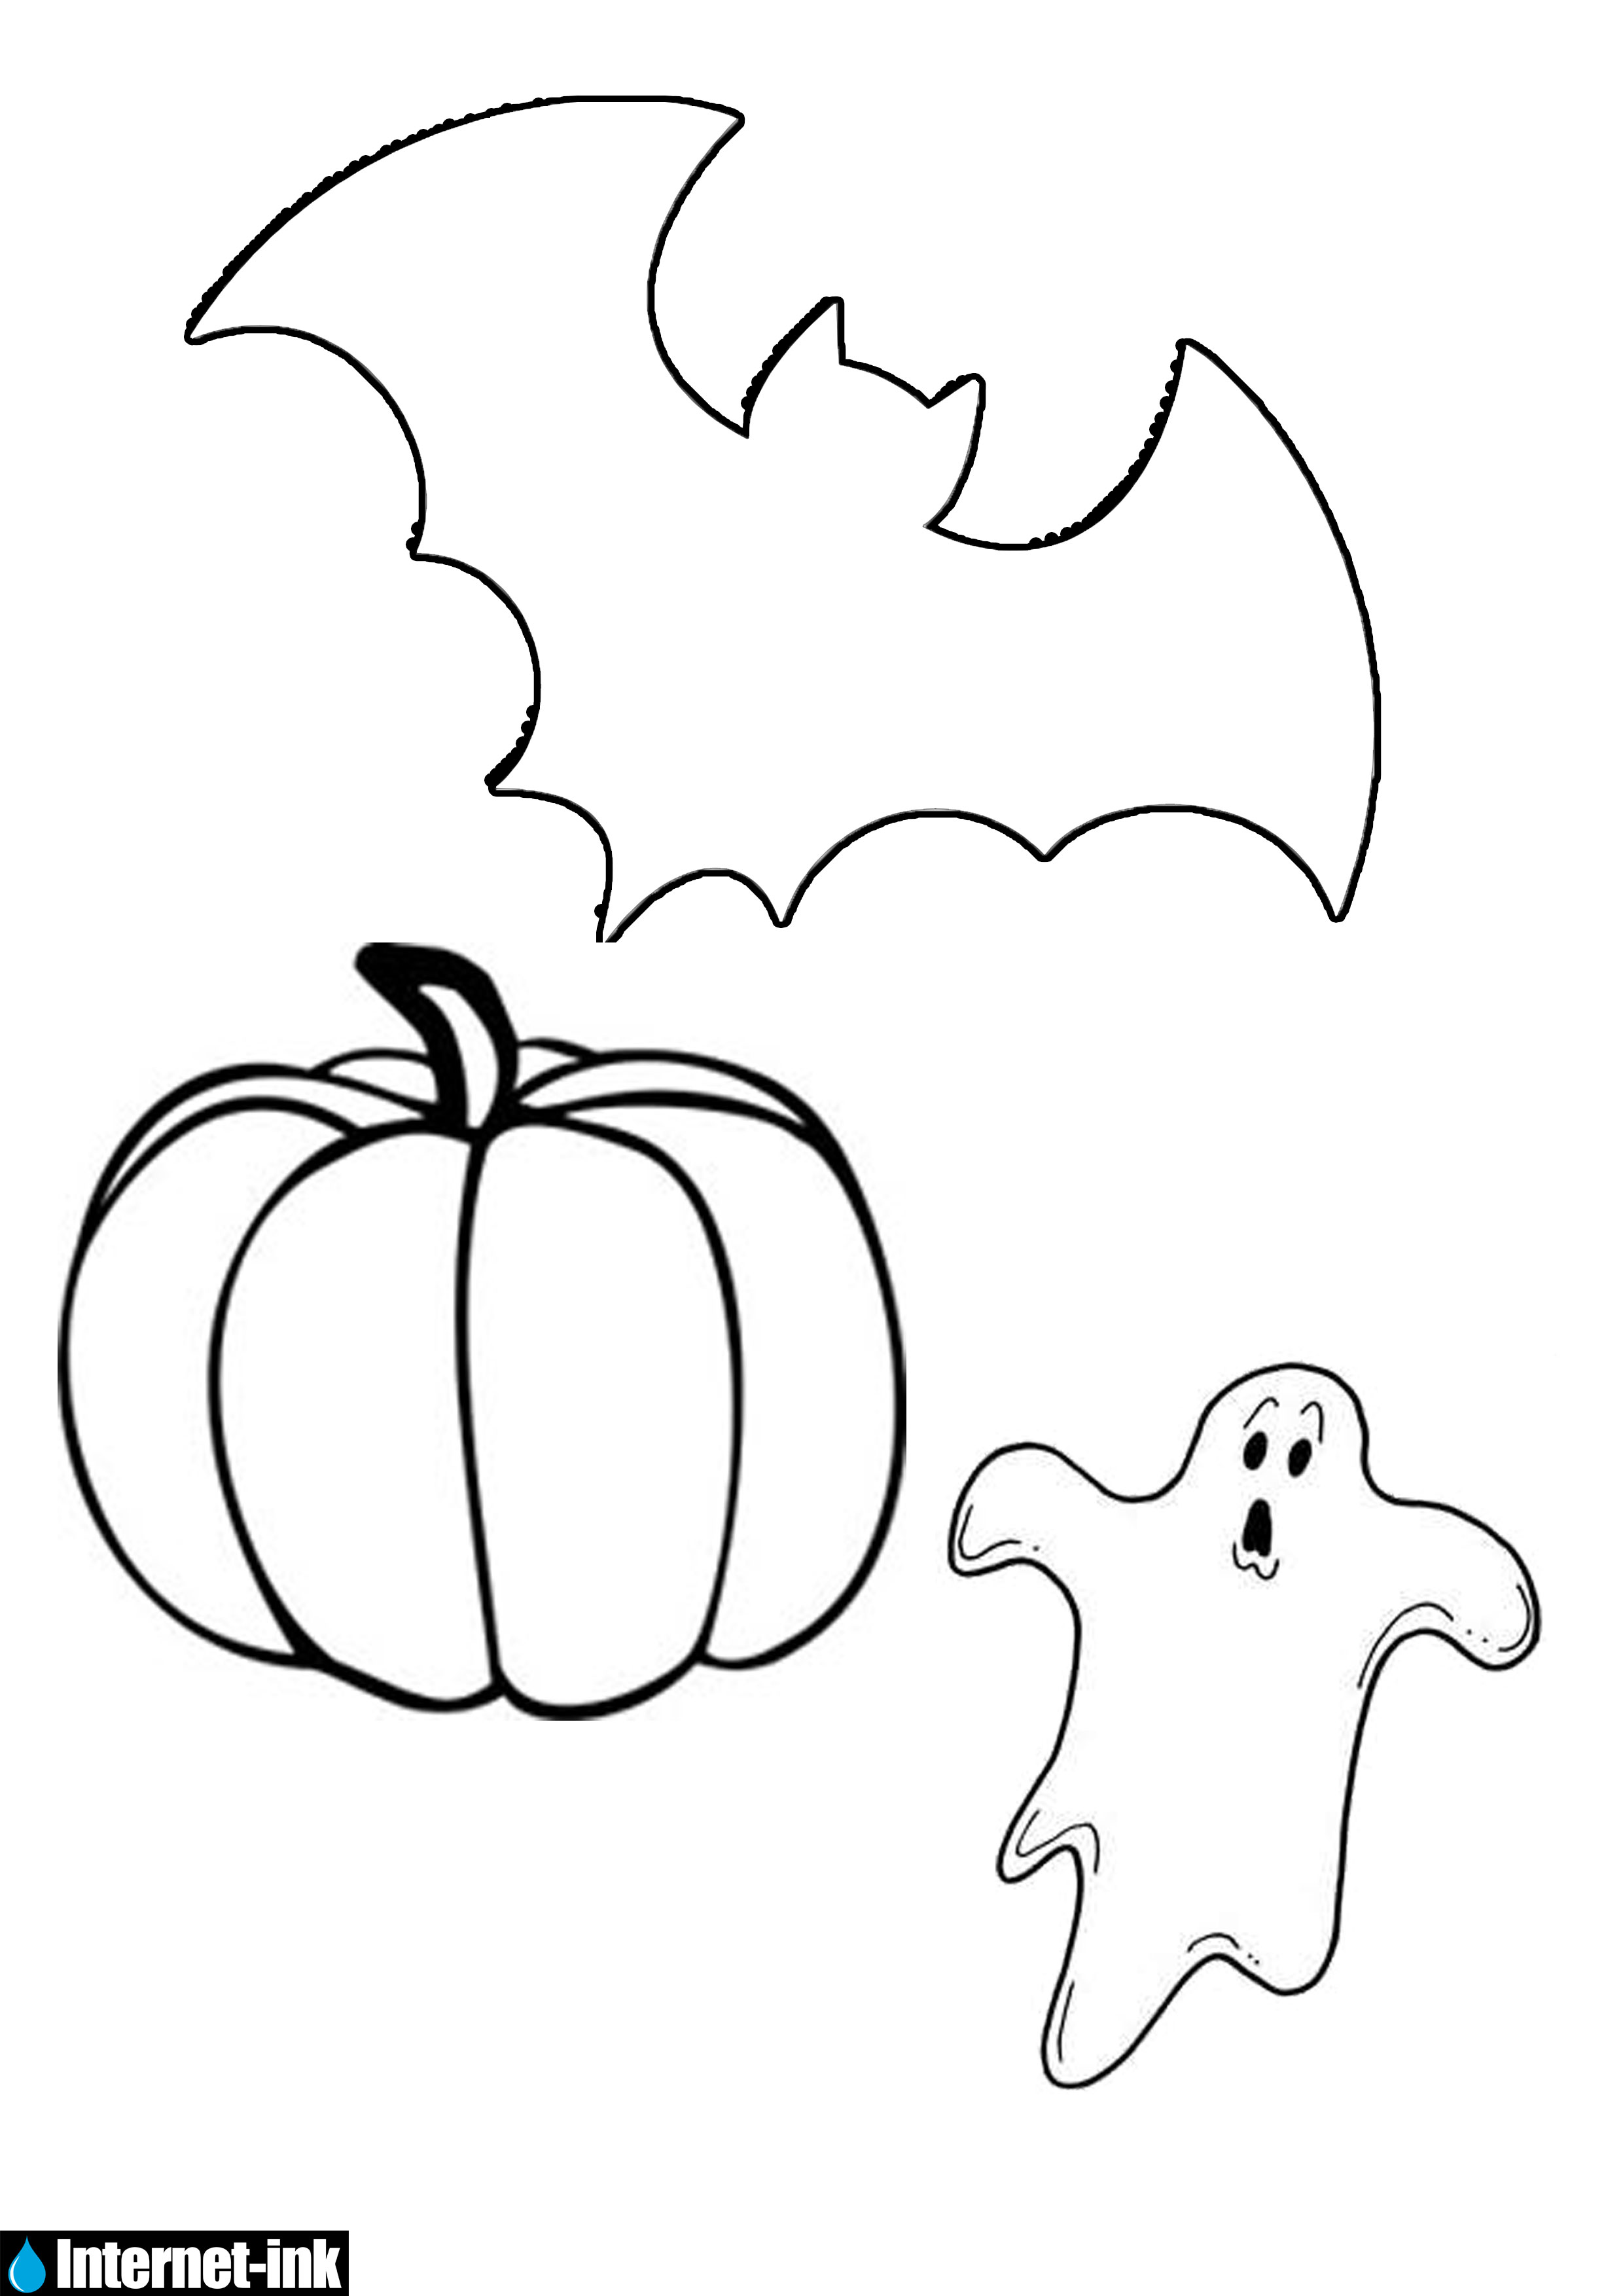 Printable Halloween Cut Out Decorations Ink